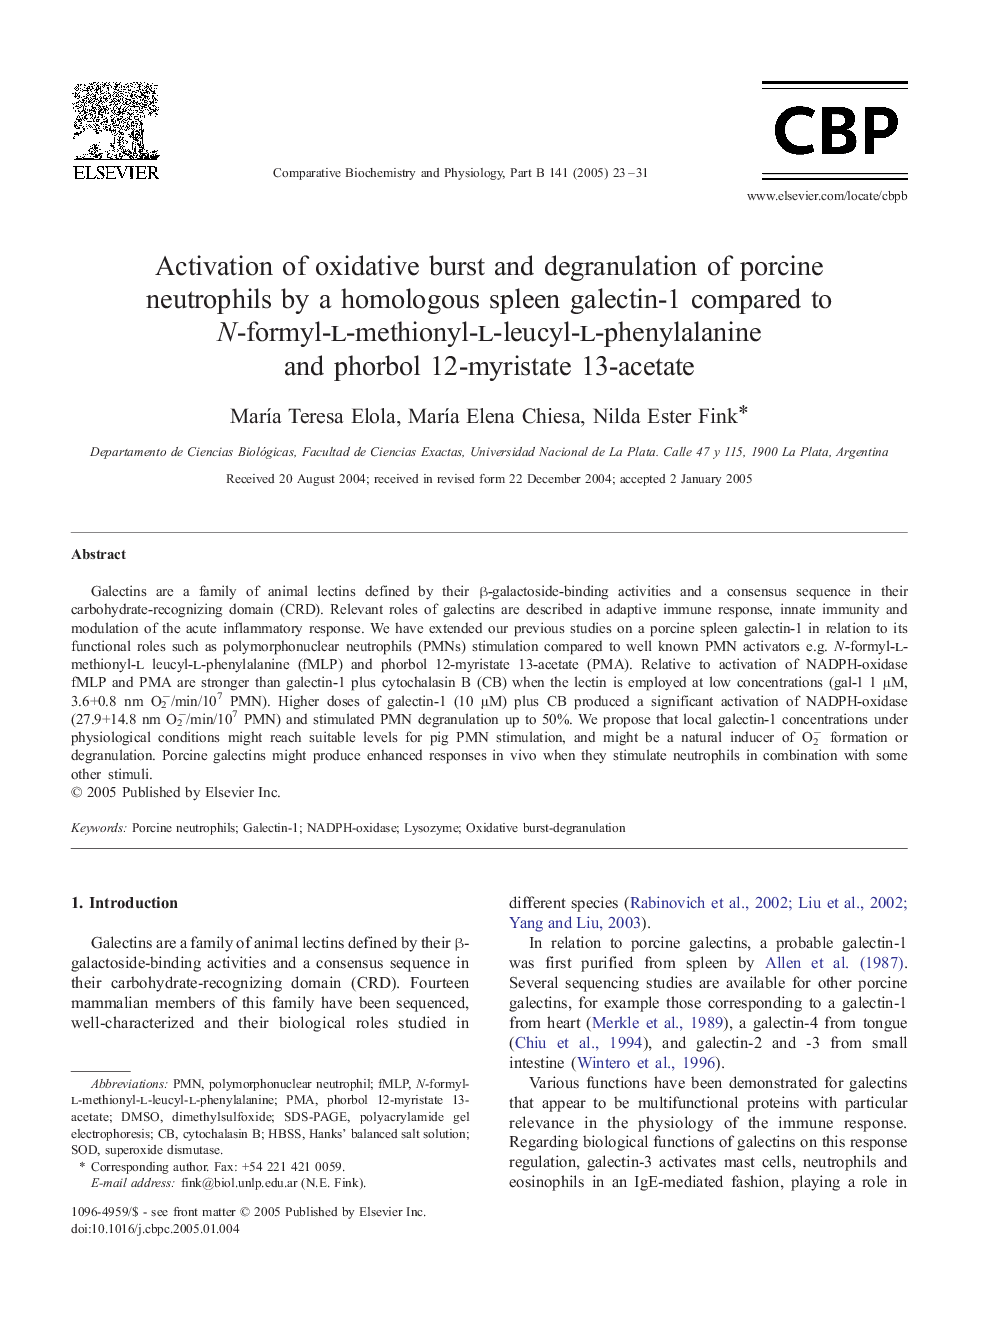 Activation of oxidative burst and degranulation of porcine neutrophils by a homologous spleen galectin-1 compared to N-formyl-l-methionyl-l-leucyl-l-phenylalanine and phorbol 12-myristate 13-acetate